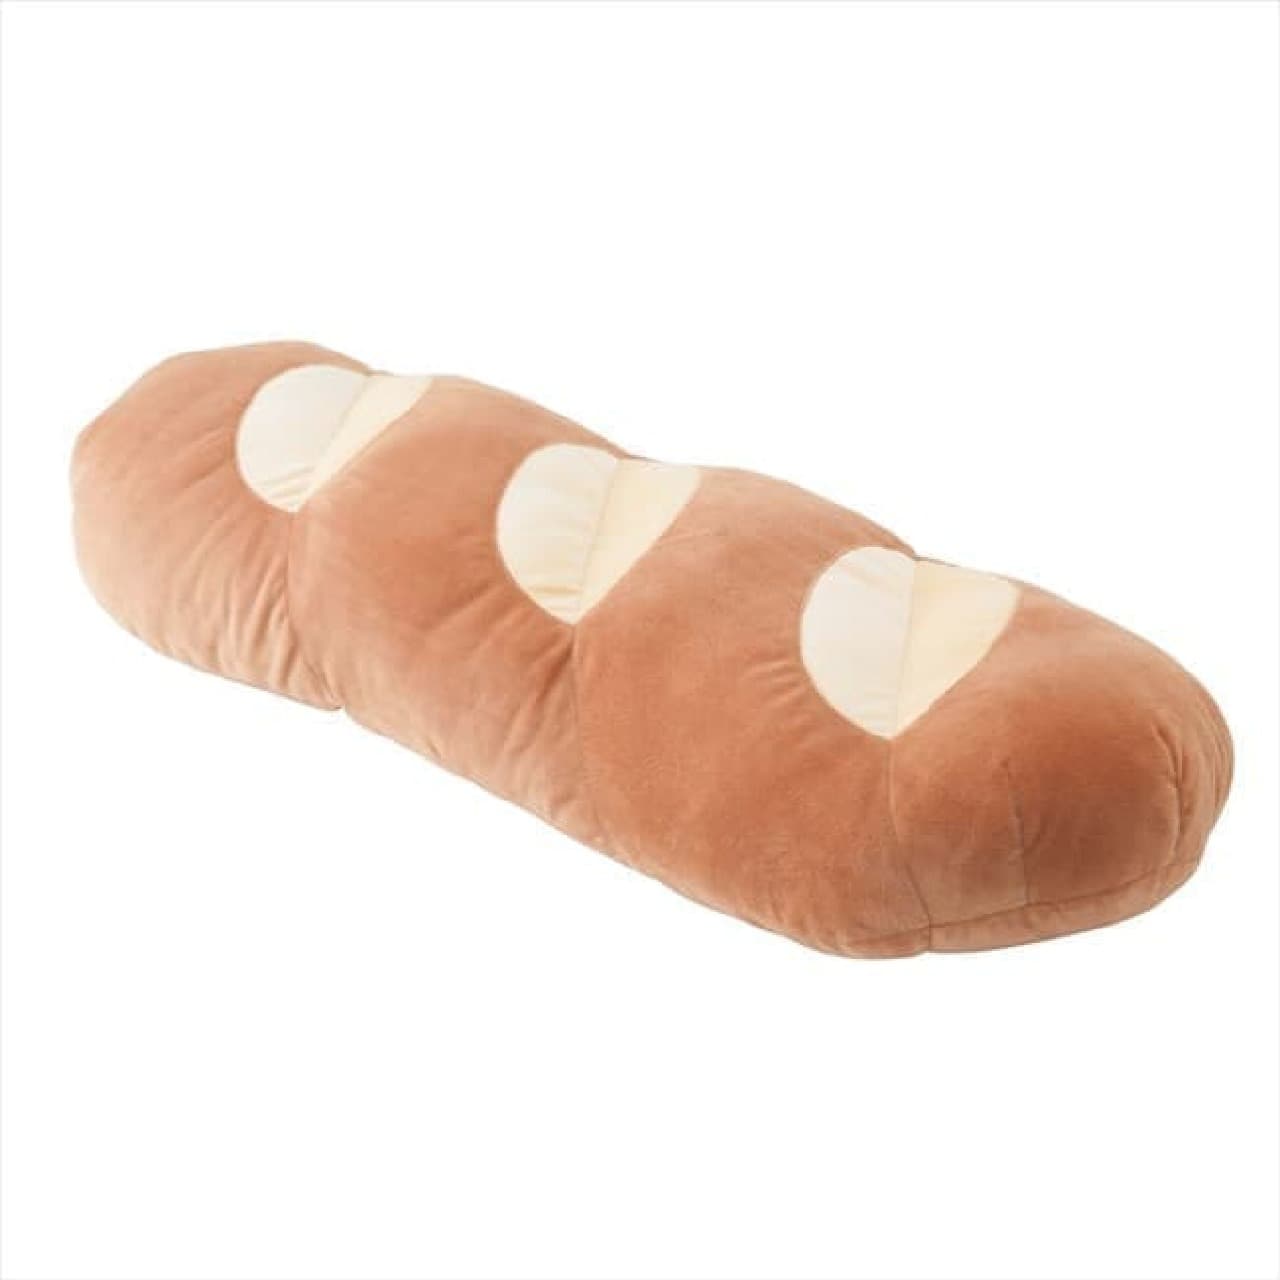 "Panque Cushion" at Villevan --French bread-shaped body pillow